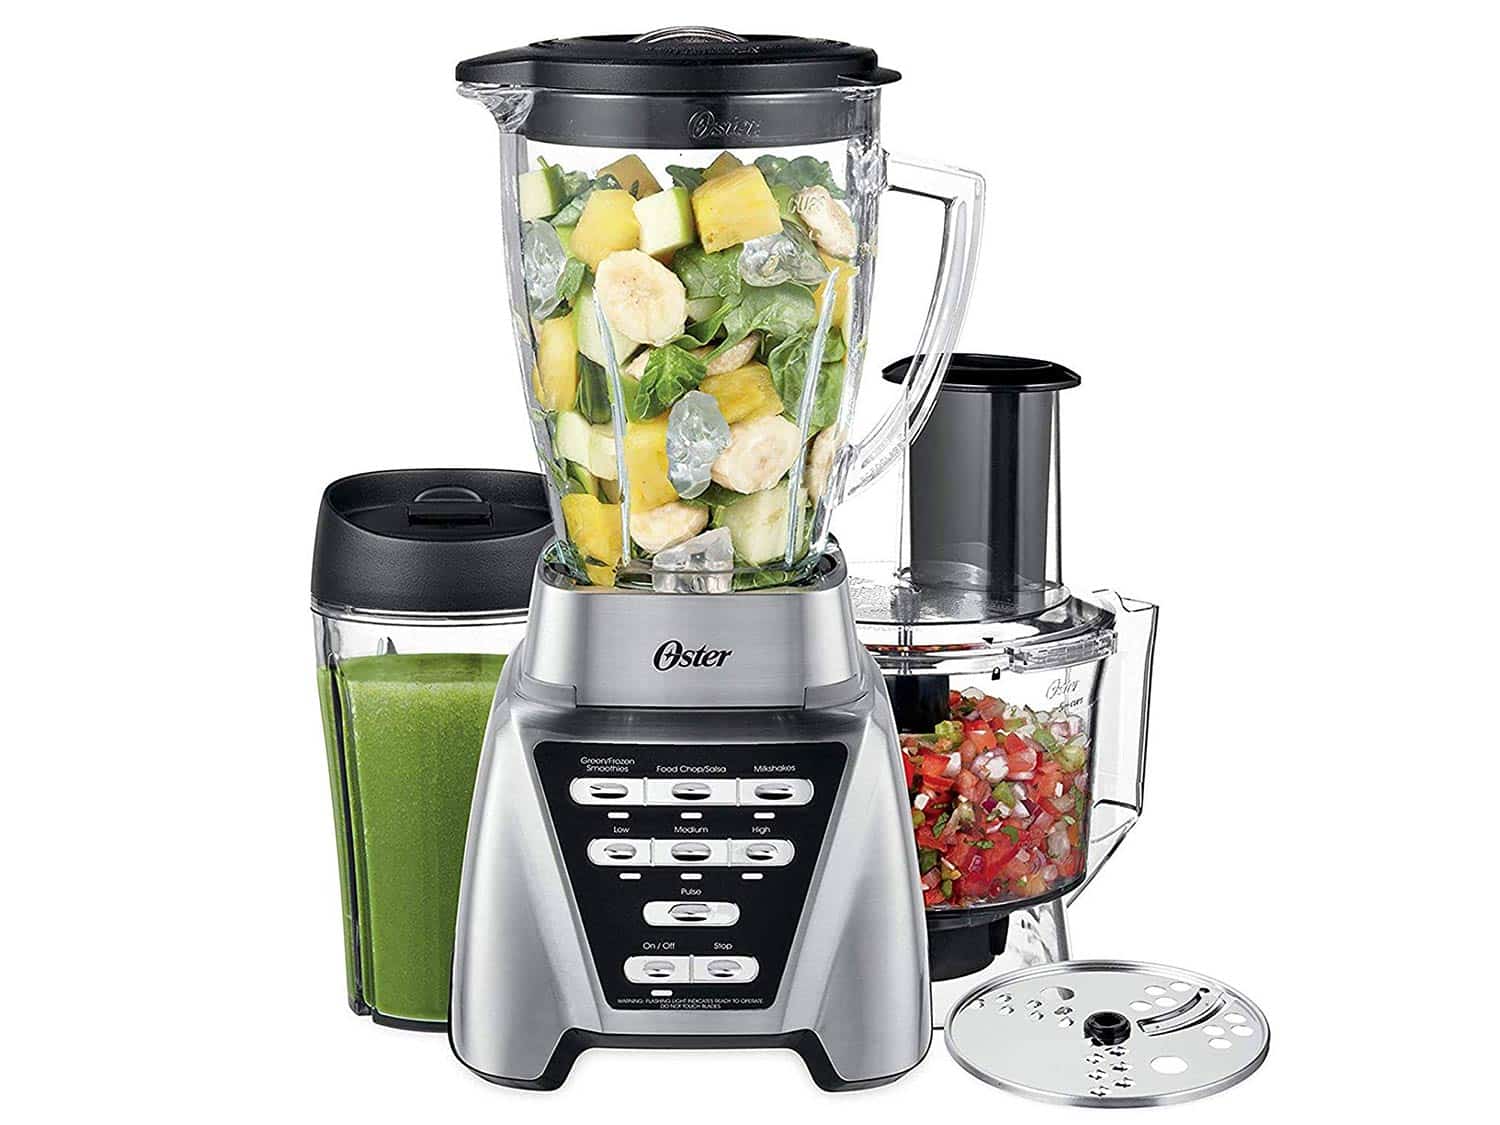 Oster Blender | Pro 1200 with Glass Jar, 24-Ounce Smoothie Cup and Food Processor Attachment, Brushed Nickel